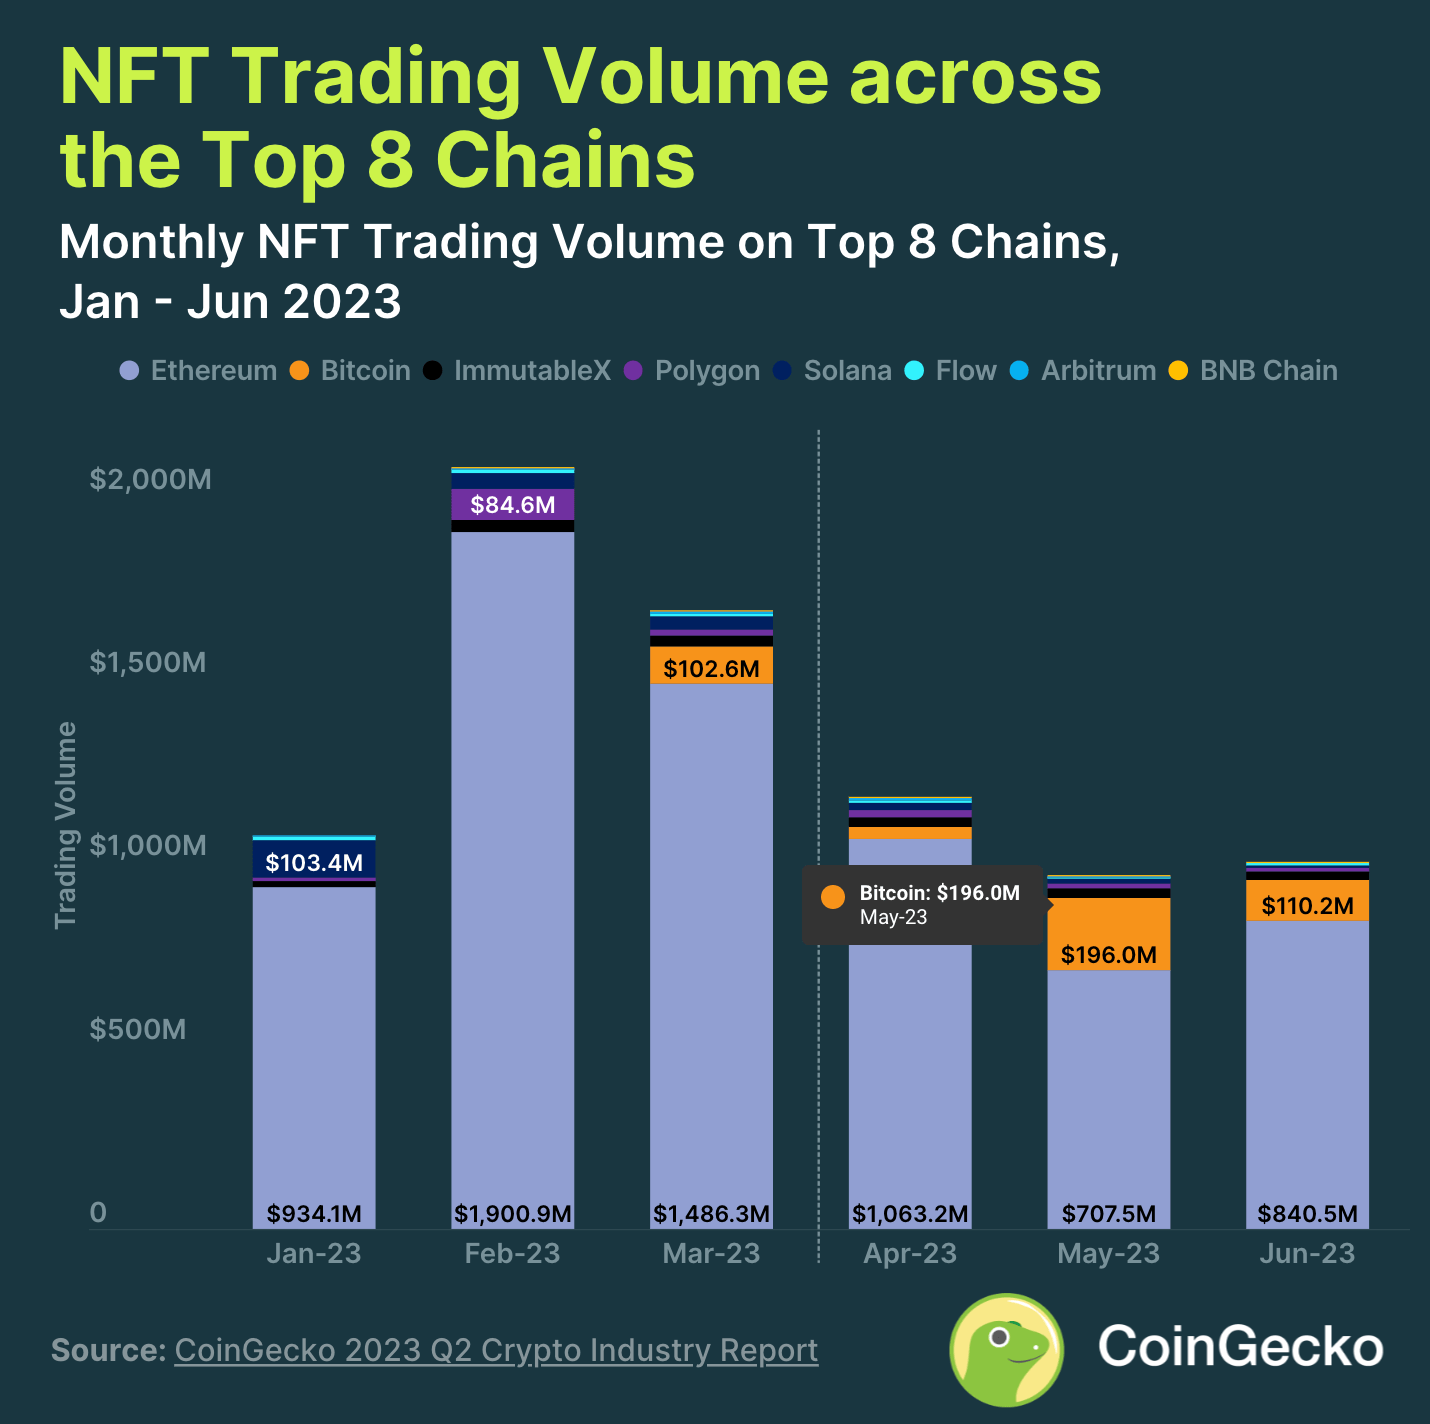 NFT Trading Volume Across the Top 8 Chains